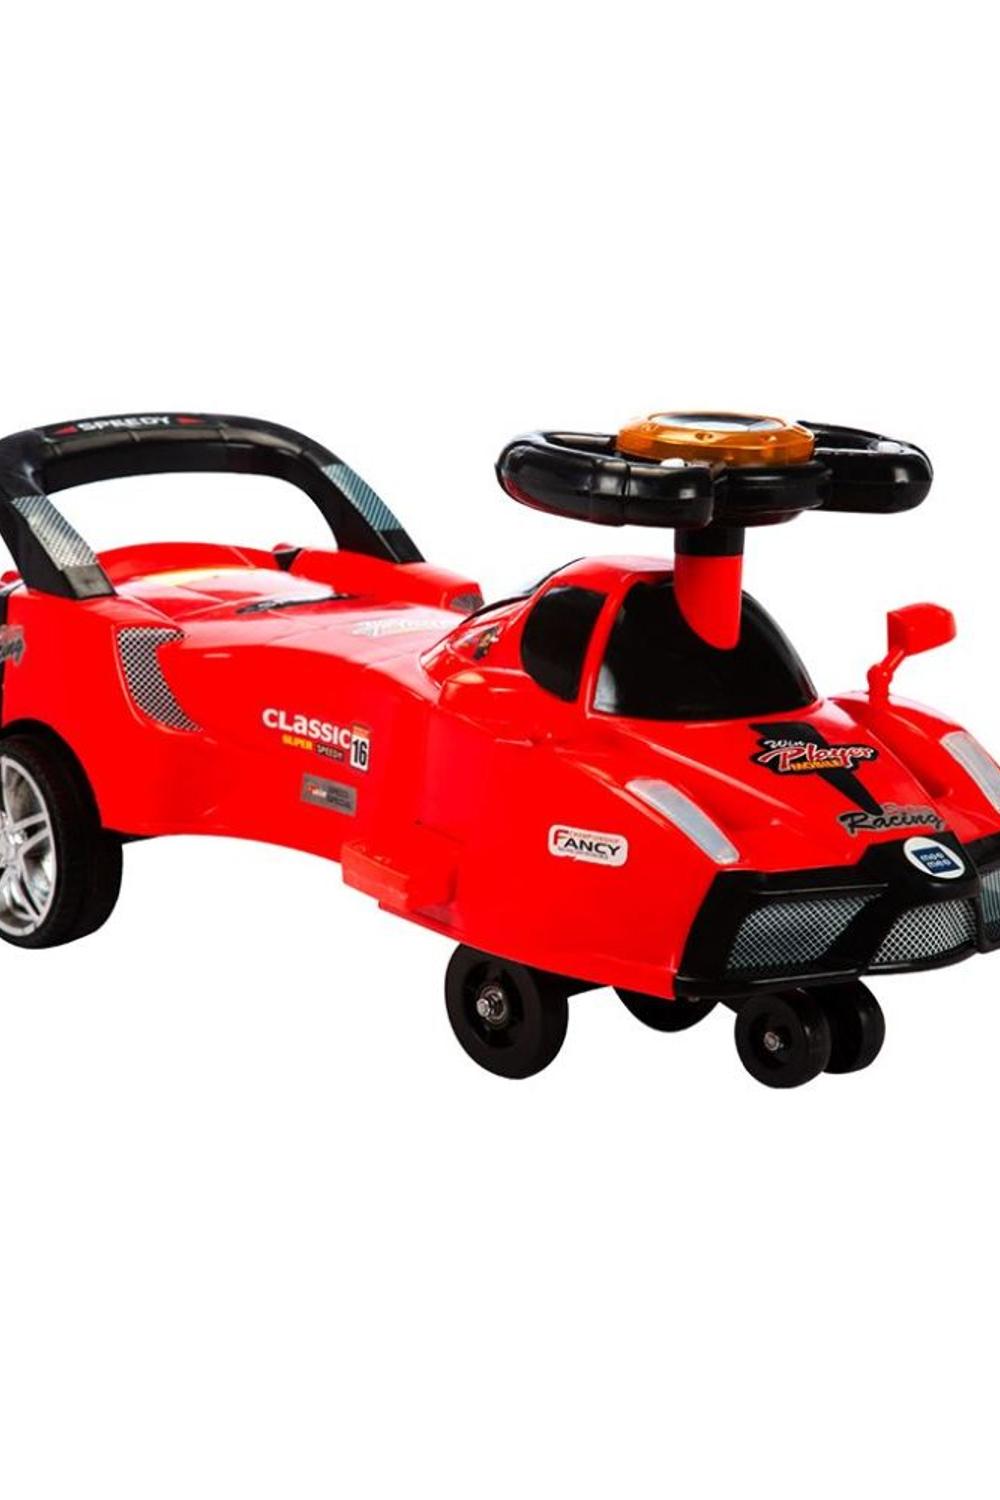 Mee Mee Baby Fun Racing Twister Scooter (Red)